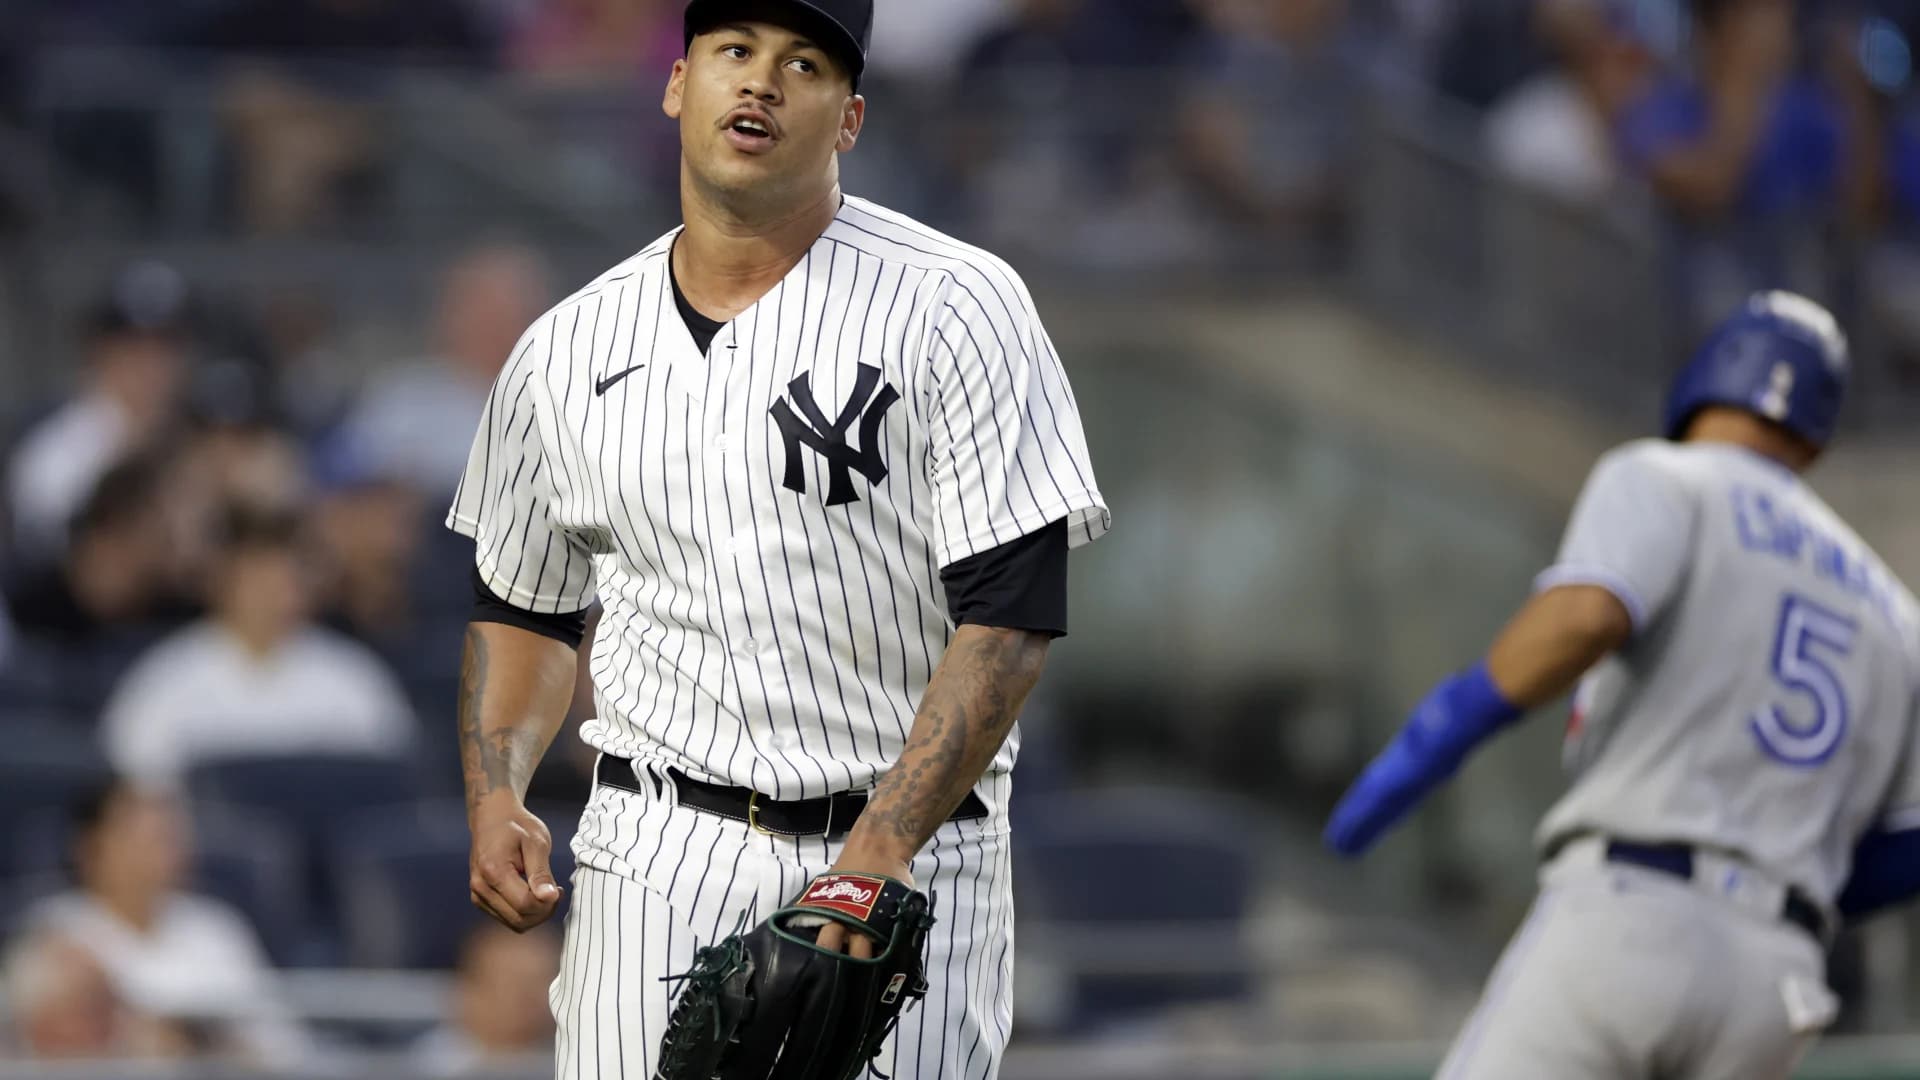 Yankees' Montas needs surgery, out most or all of season